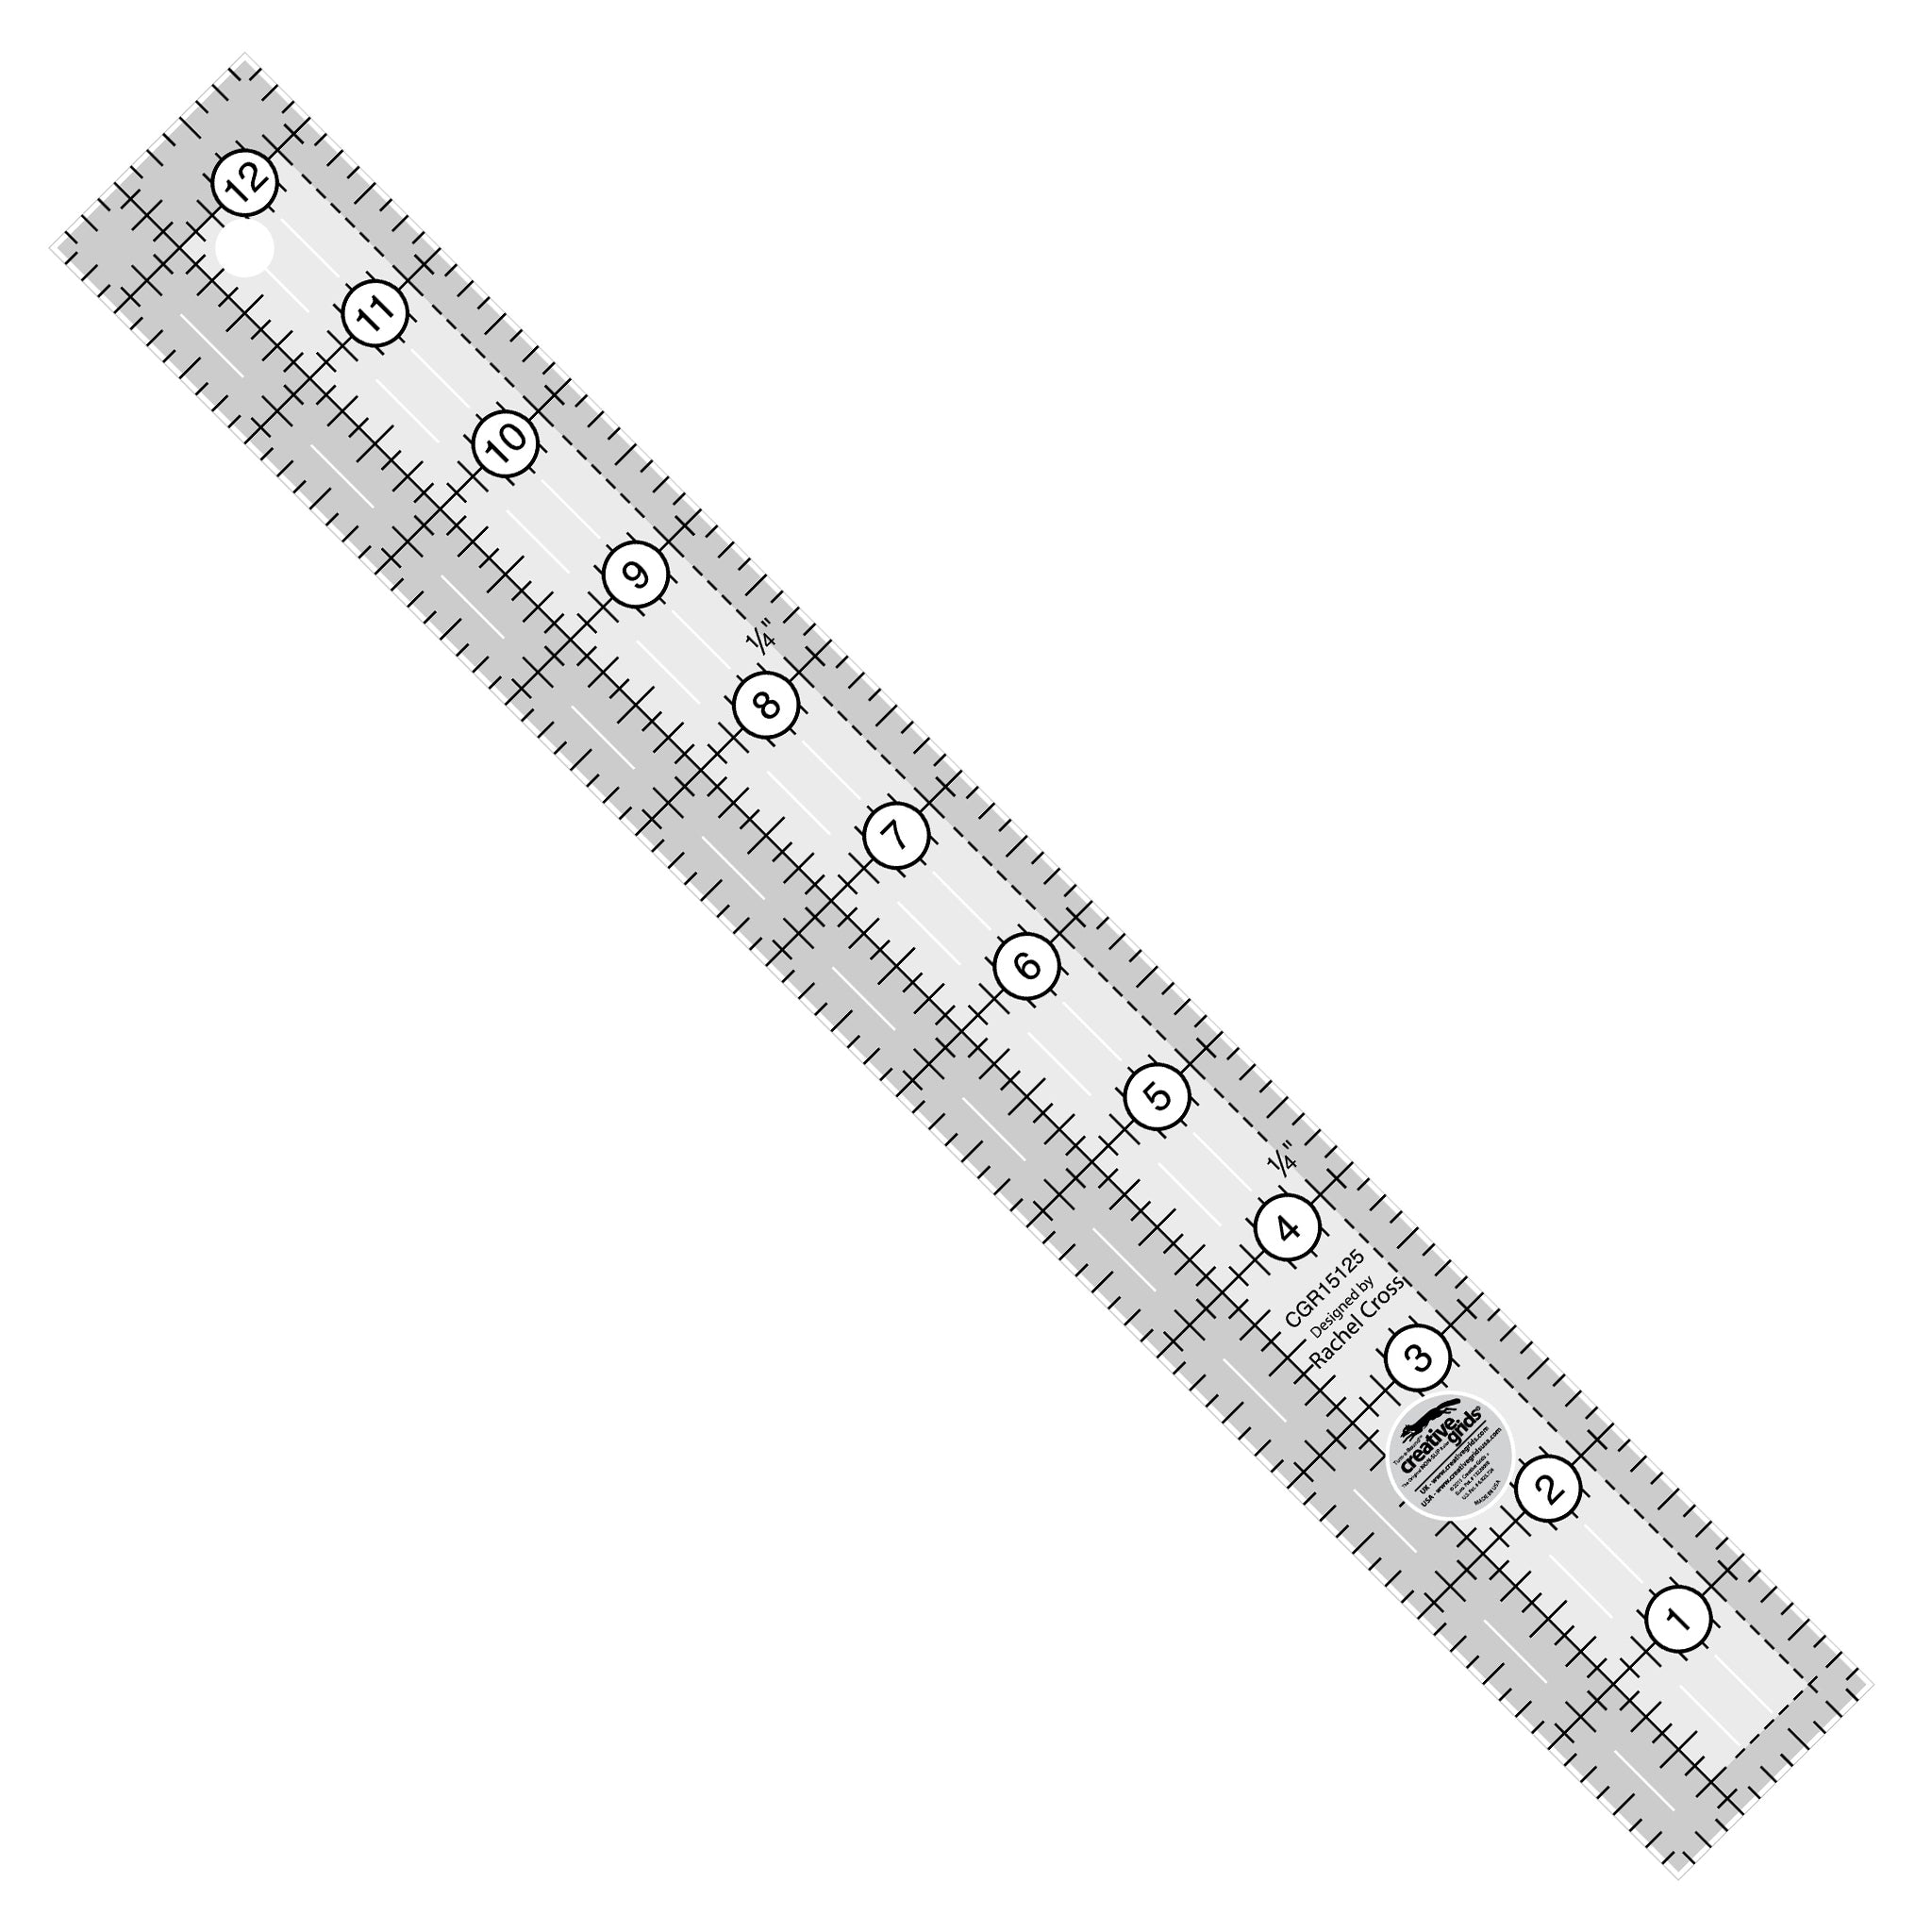 Creative Grids 1-1/2-Inch X 12-1/2-Inch Quilt Ruler (CGR15125)